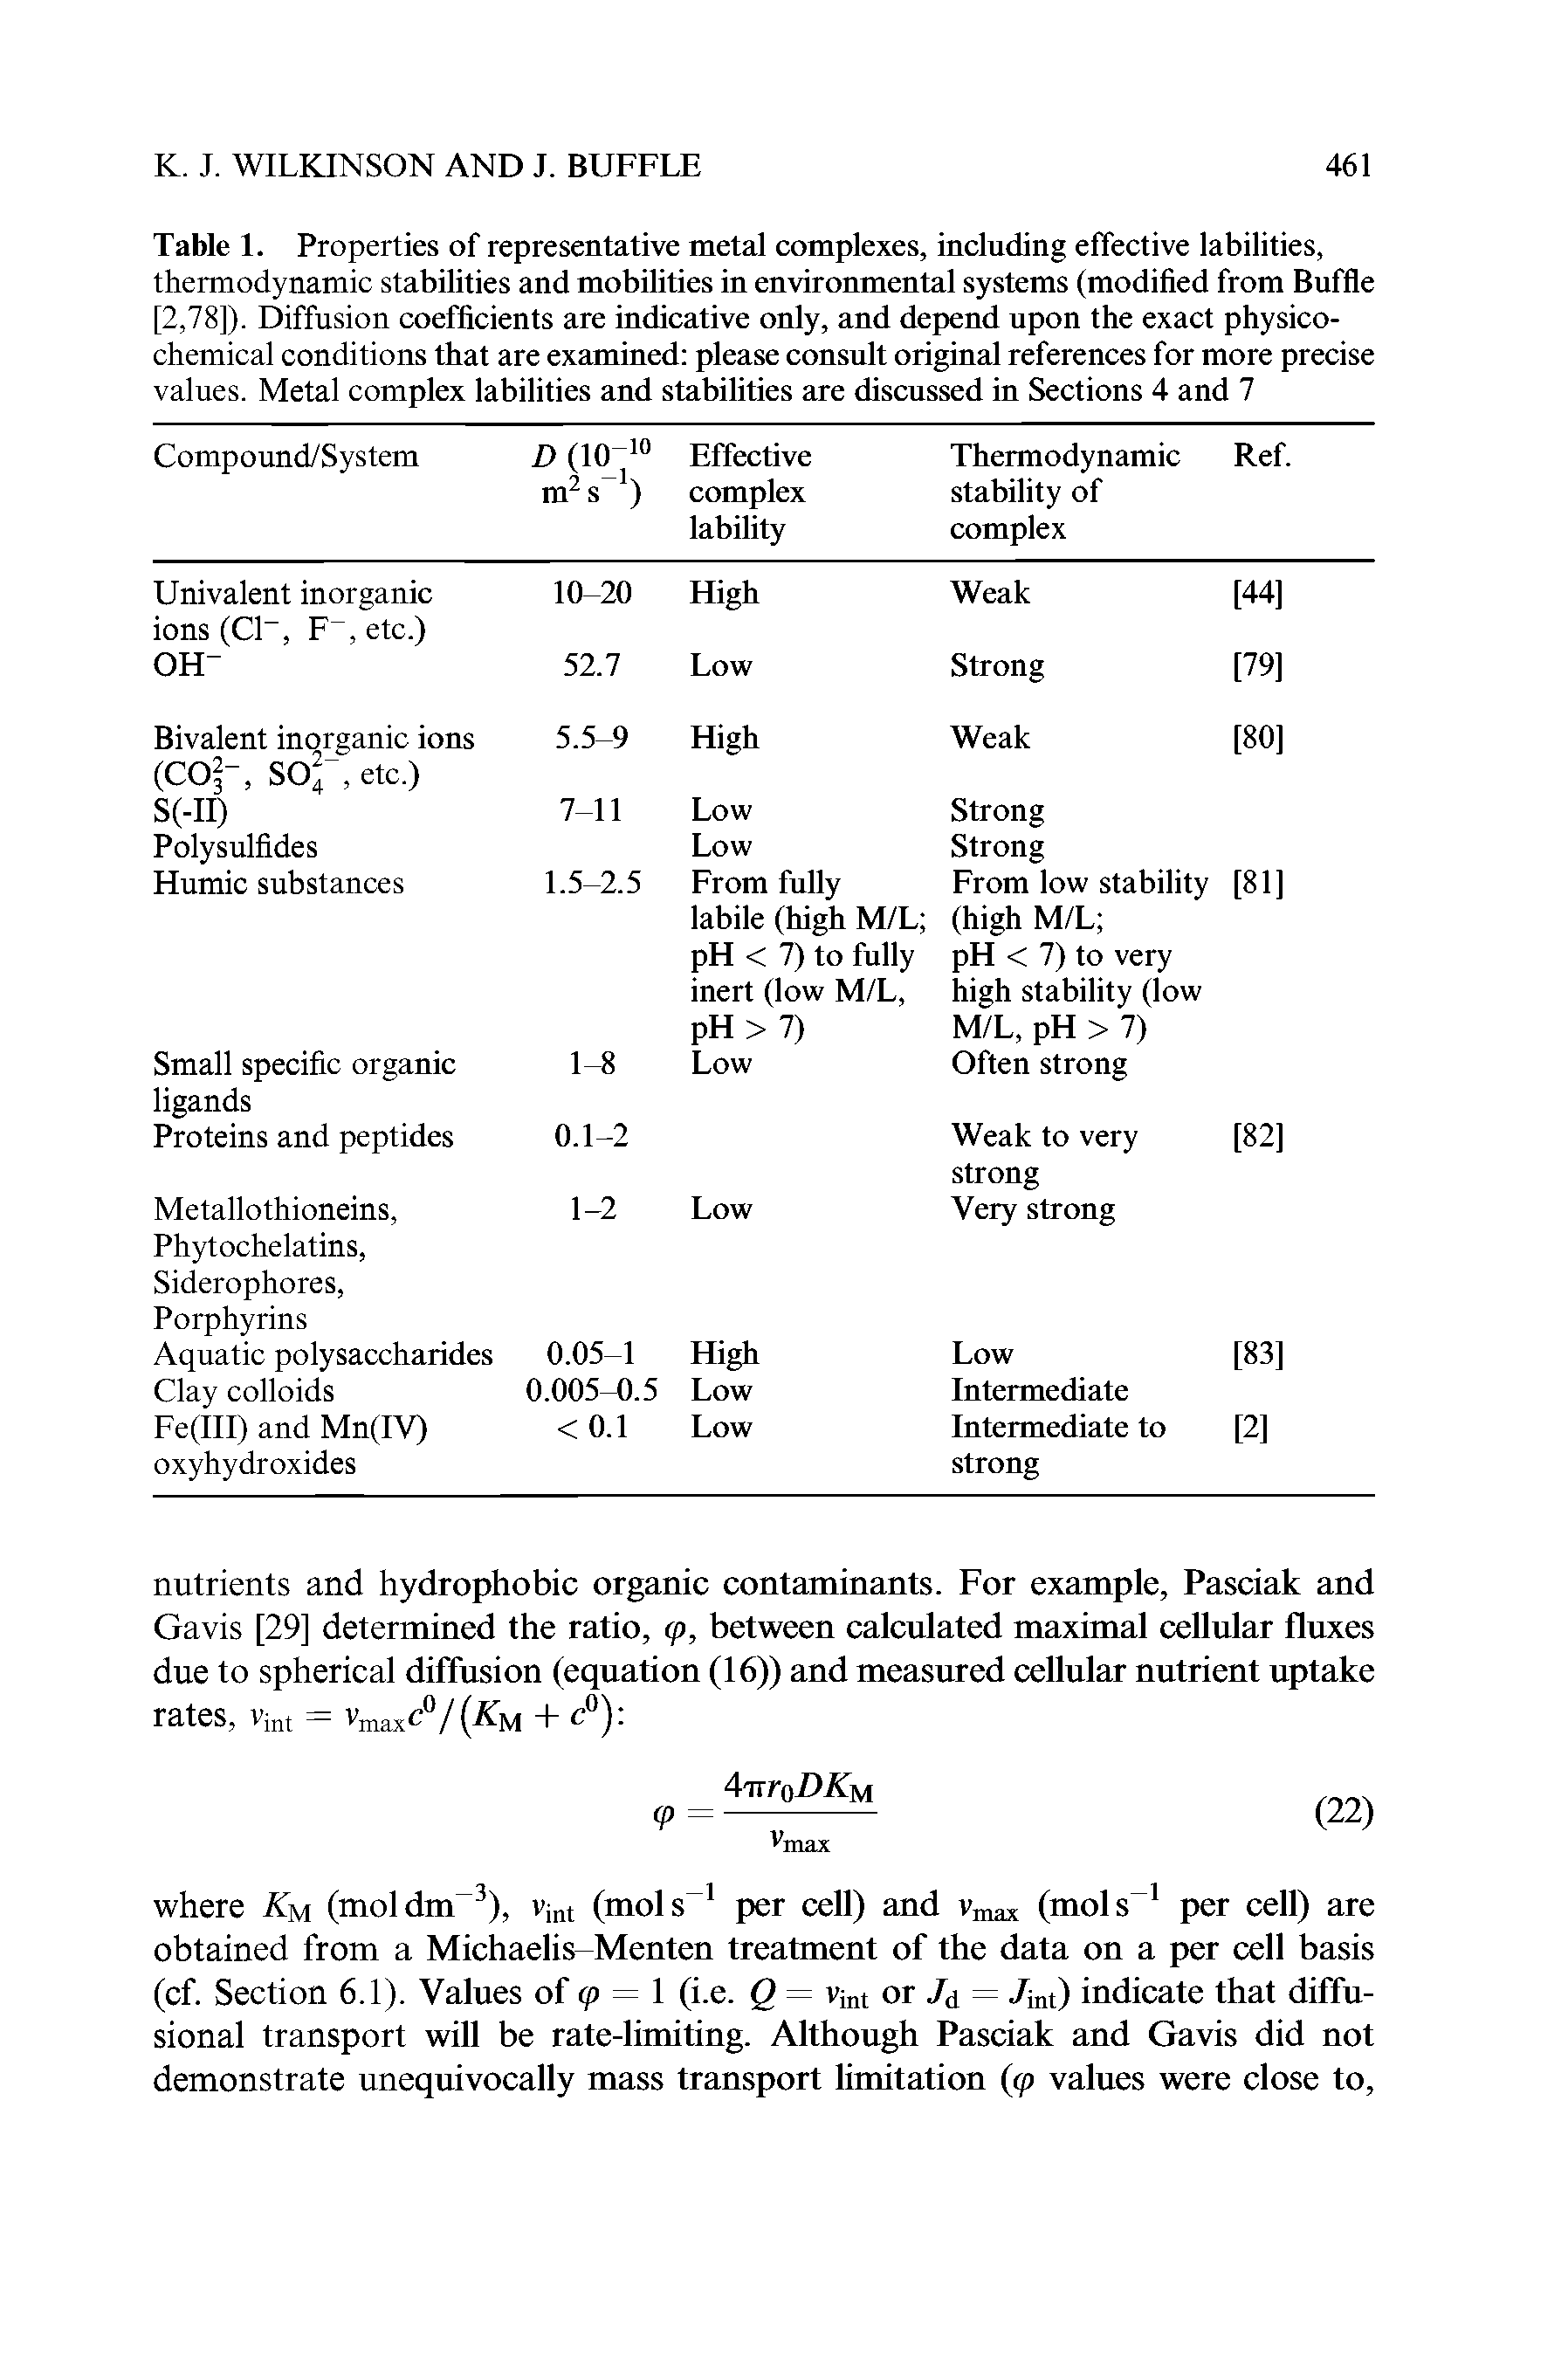 Table 1. Properties of representative metal complexes, including effective labilities, thermodynamic stabilities and mobilities in environmental systems (modified from Buffle [2,78]). Diffusion coefficients are indicative only, and depend upon the exact physicochemical conditions that are examined please consult original references for more precise values. Metal complex labilities and stabilities are discussed in Sections 4 and 7...